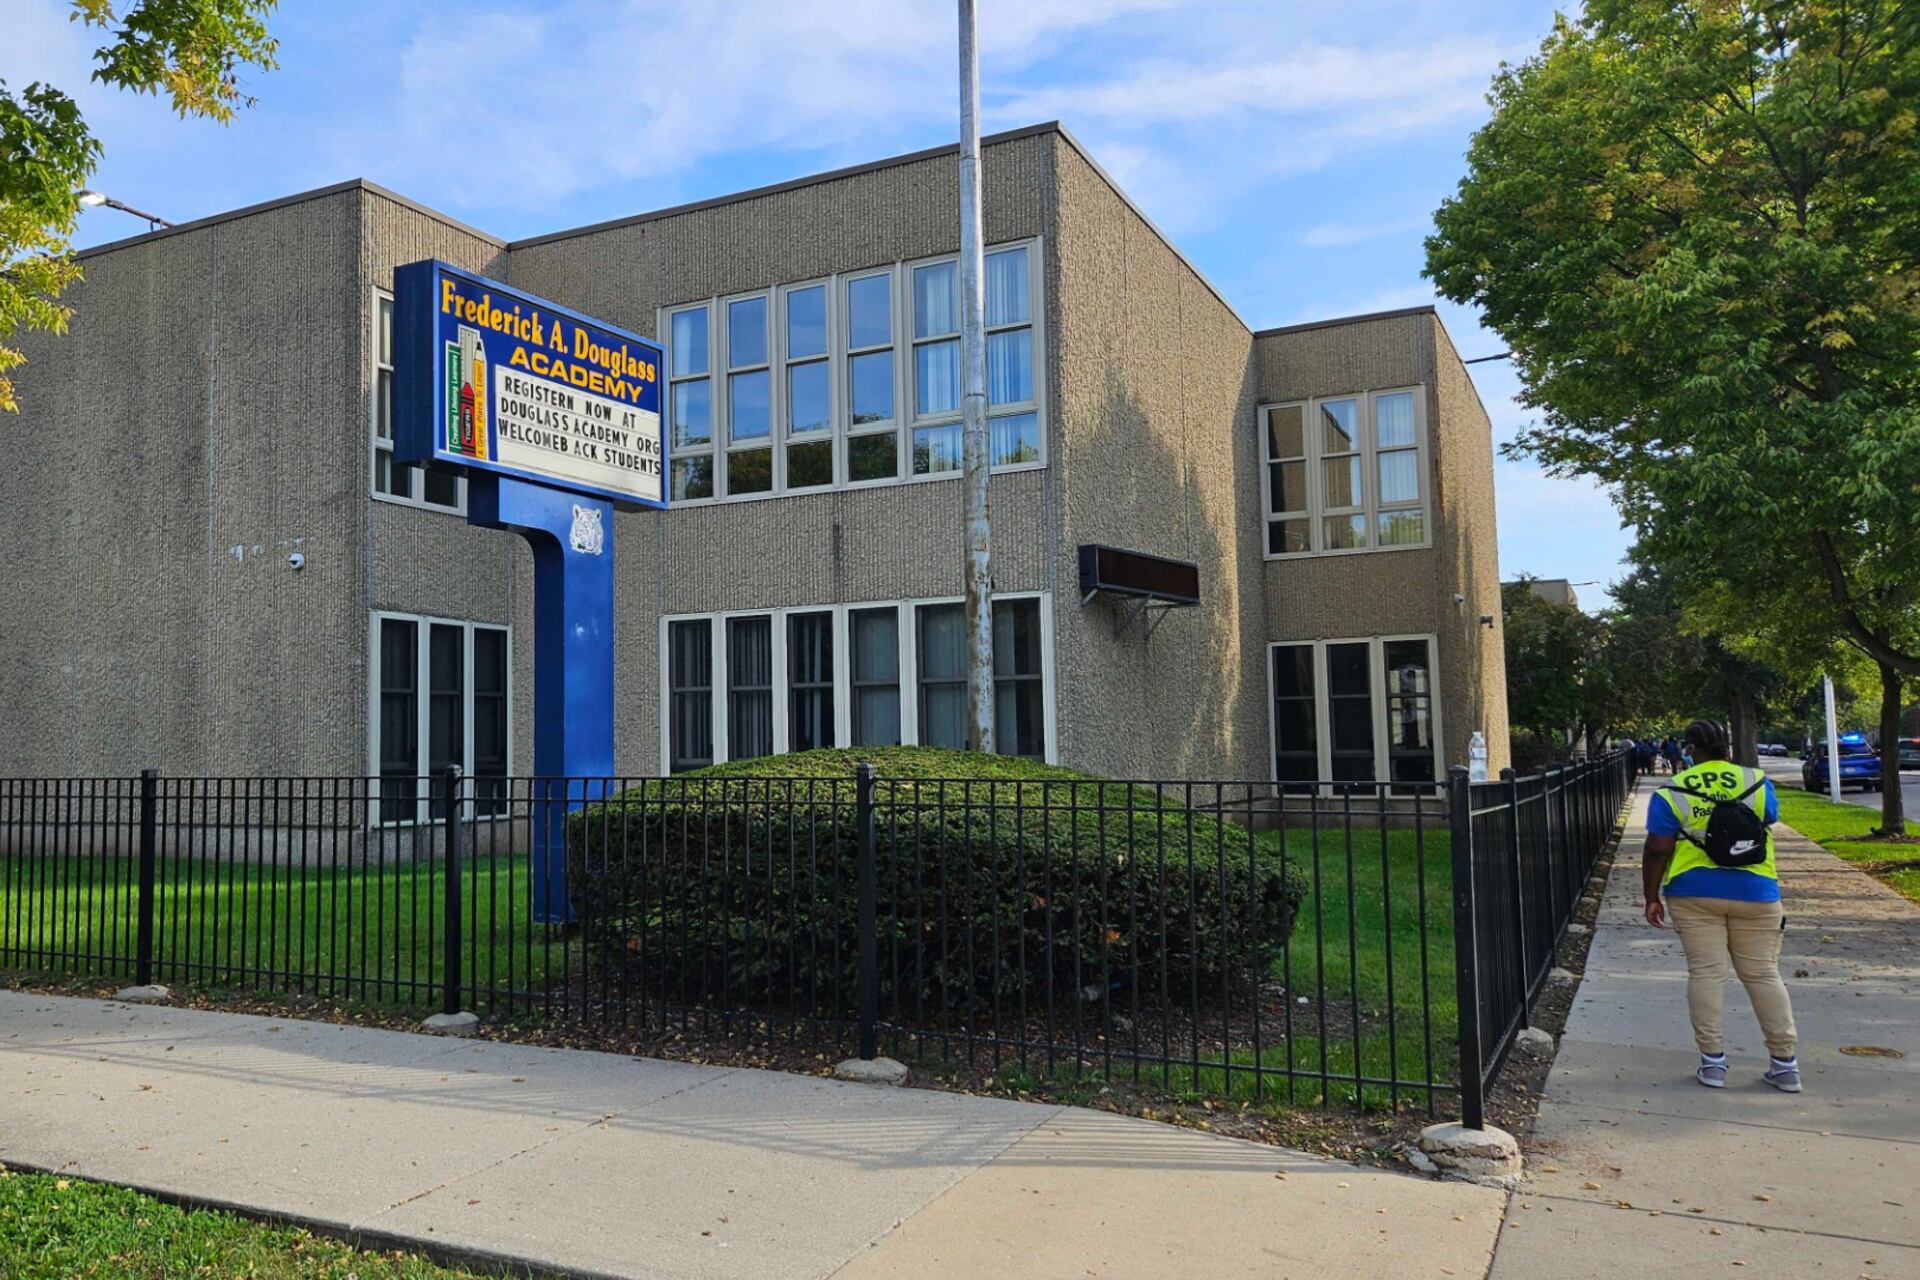 The outside of a school with the person to the right walking down the side walk. There is a large sign in the foreground and blue sky in the back ground.